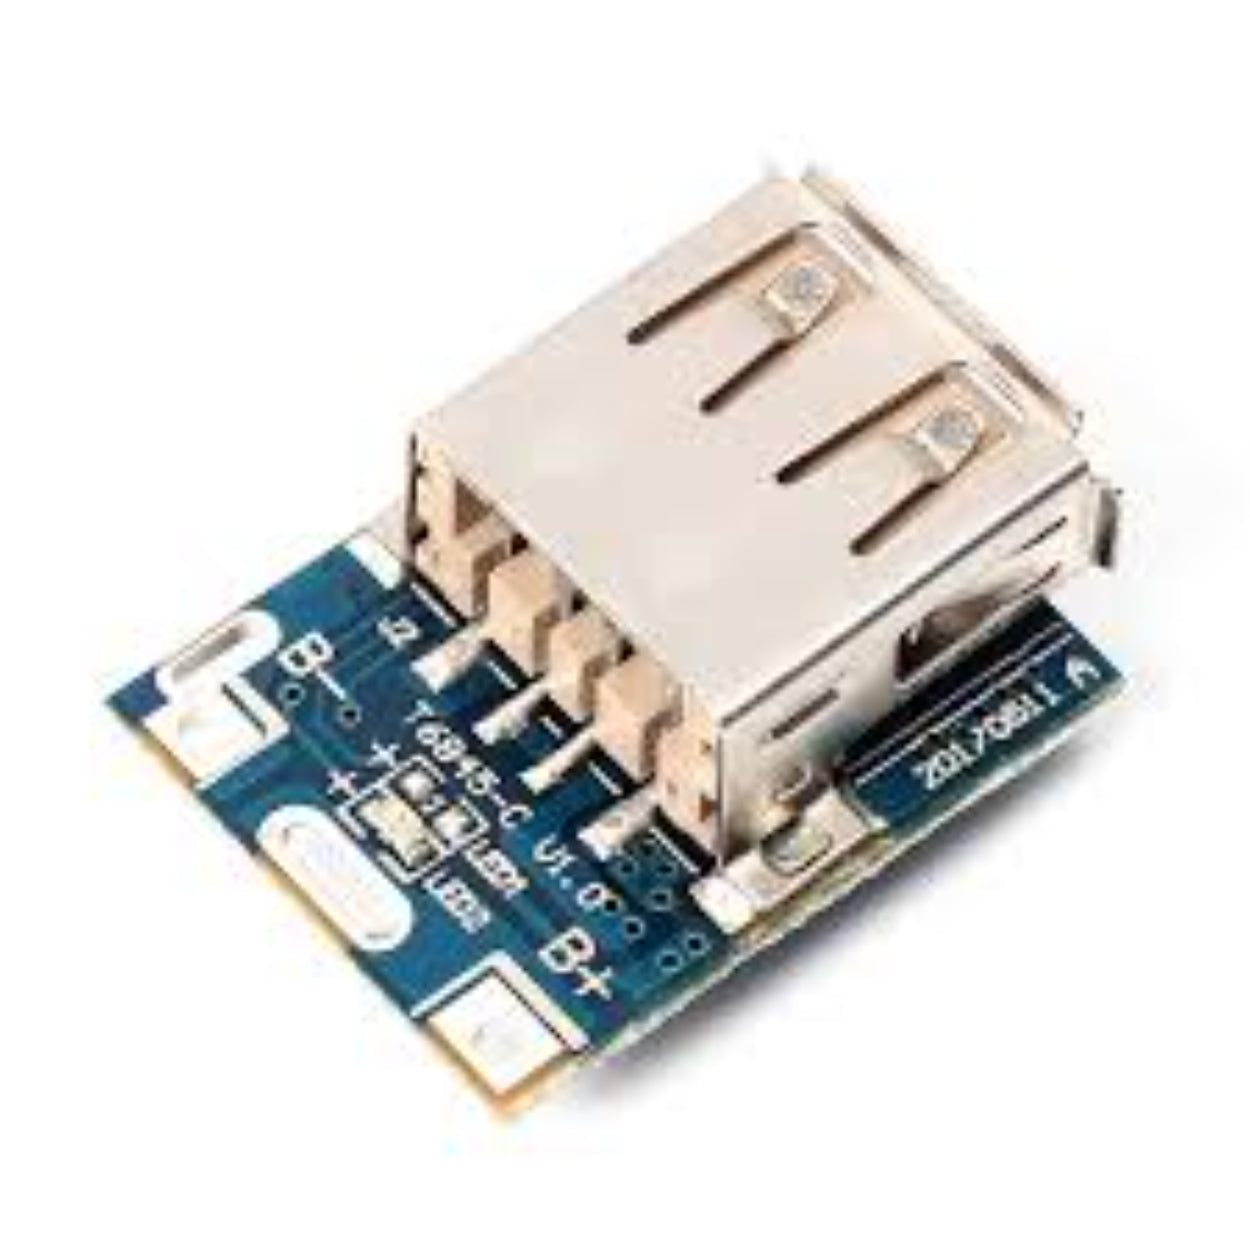 5V Step-Up Power Module Lithium Battery Charging Protection Board USB For DIY Charger 134N3P